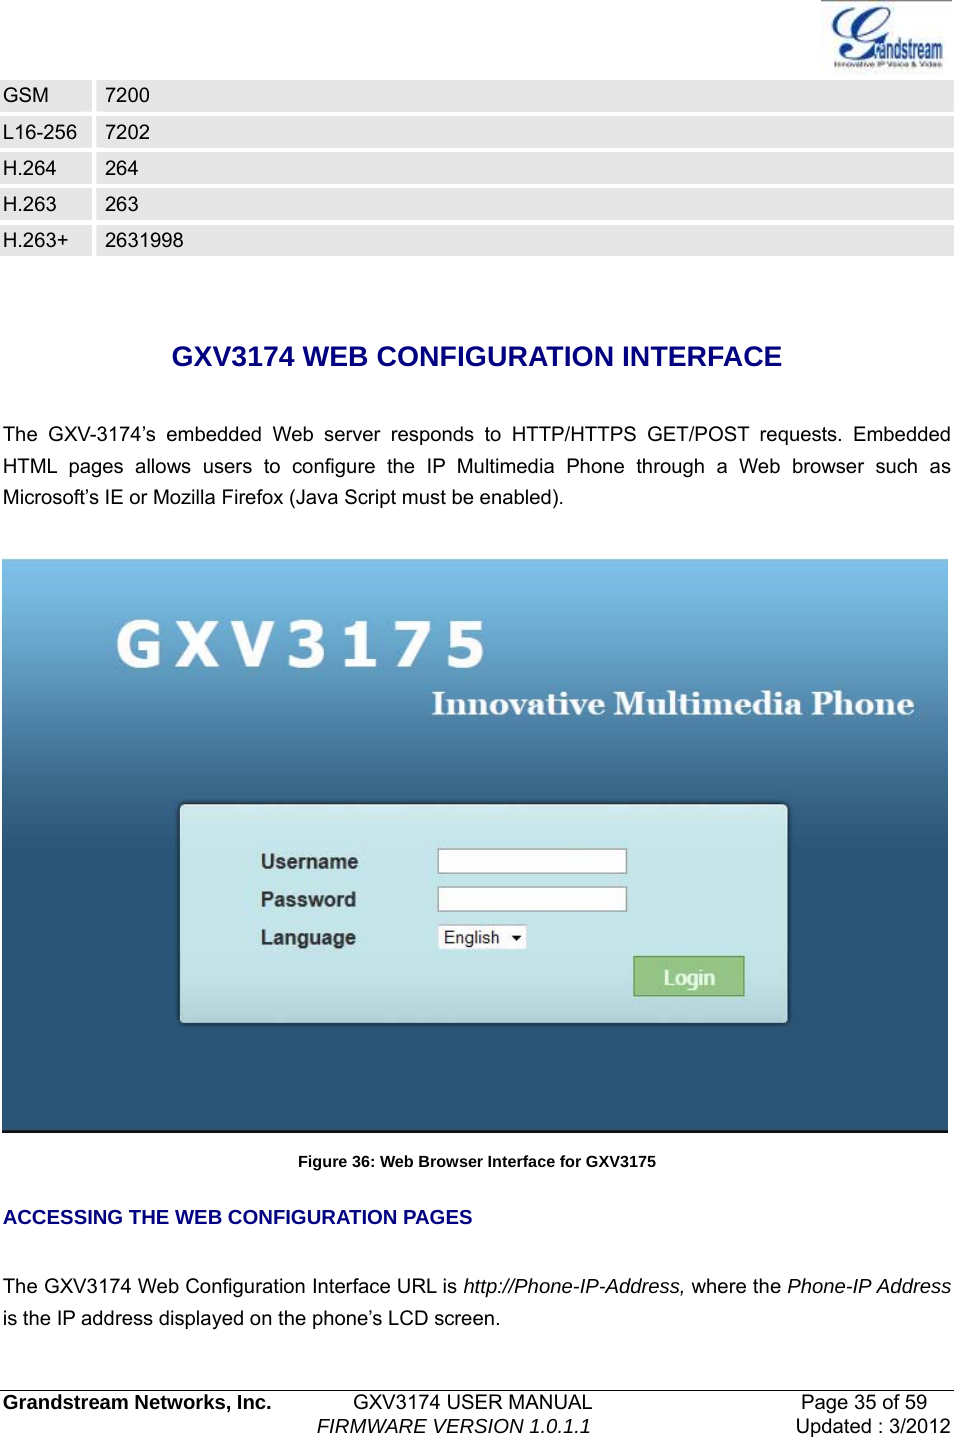   Grandstream Networks, Inc.        GXV3174 USER MANUAL                     Page 35 of 59                                FIRMWARE VERSION 1.0.1.1  Updated : 3/2012  GSM  7200 L16-256  7202 H.264  264 H.263  263 H.263+  2631998  GXV3174 WEB CONFIGURATION INTERFACE  The GXV-3174’s embedded Web server responds to HTTP/HTTPS GET/POST requests. Embedded HTML pages allows users to configure the IP Multimedia Phone through a Web browser such as Microsoft’s IE or Mozilla Firefox (Java Script must be enabled).     Figure 36: Web Browser Interface for GXV3175 ACCESSING THE WEB CONFIGURATION PAGES  The GXV3174 Web Configuration Interface URL is http://Phone-IP-Address, where the Phone-IP Address is the IP address displayed on the phone’s LCD screen.  